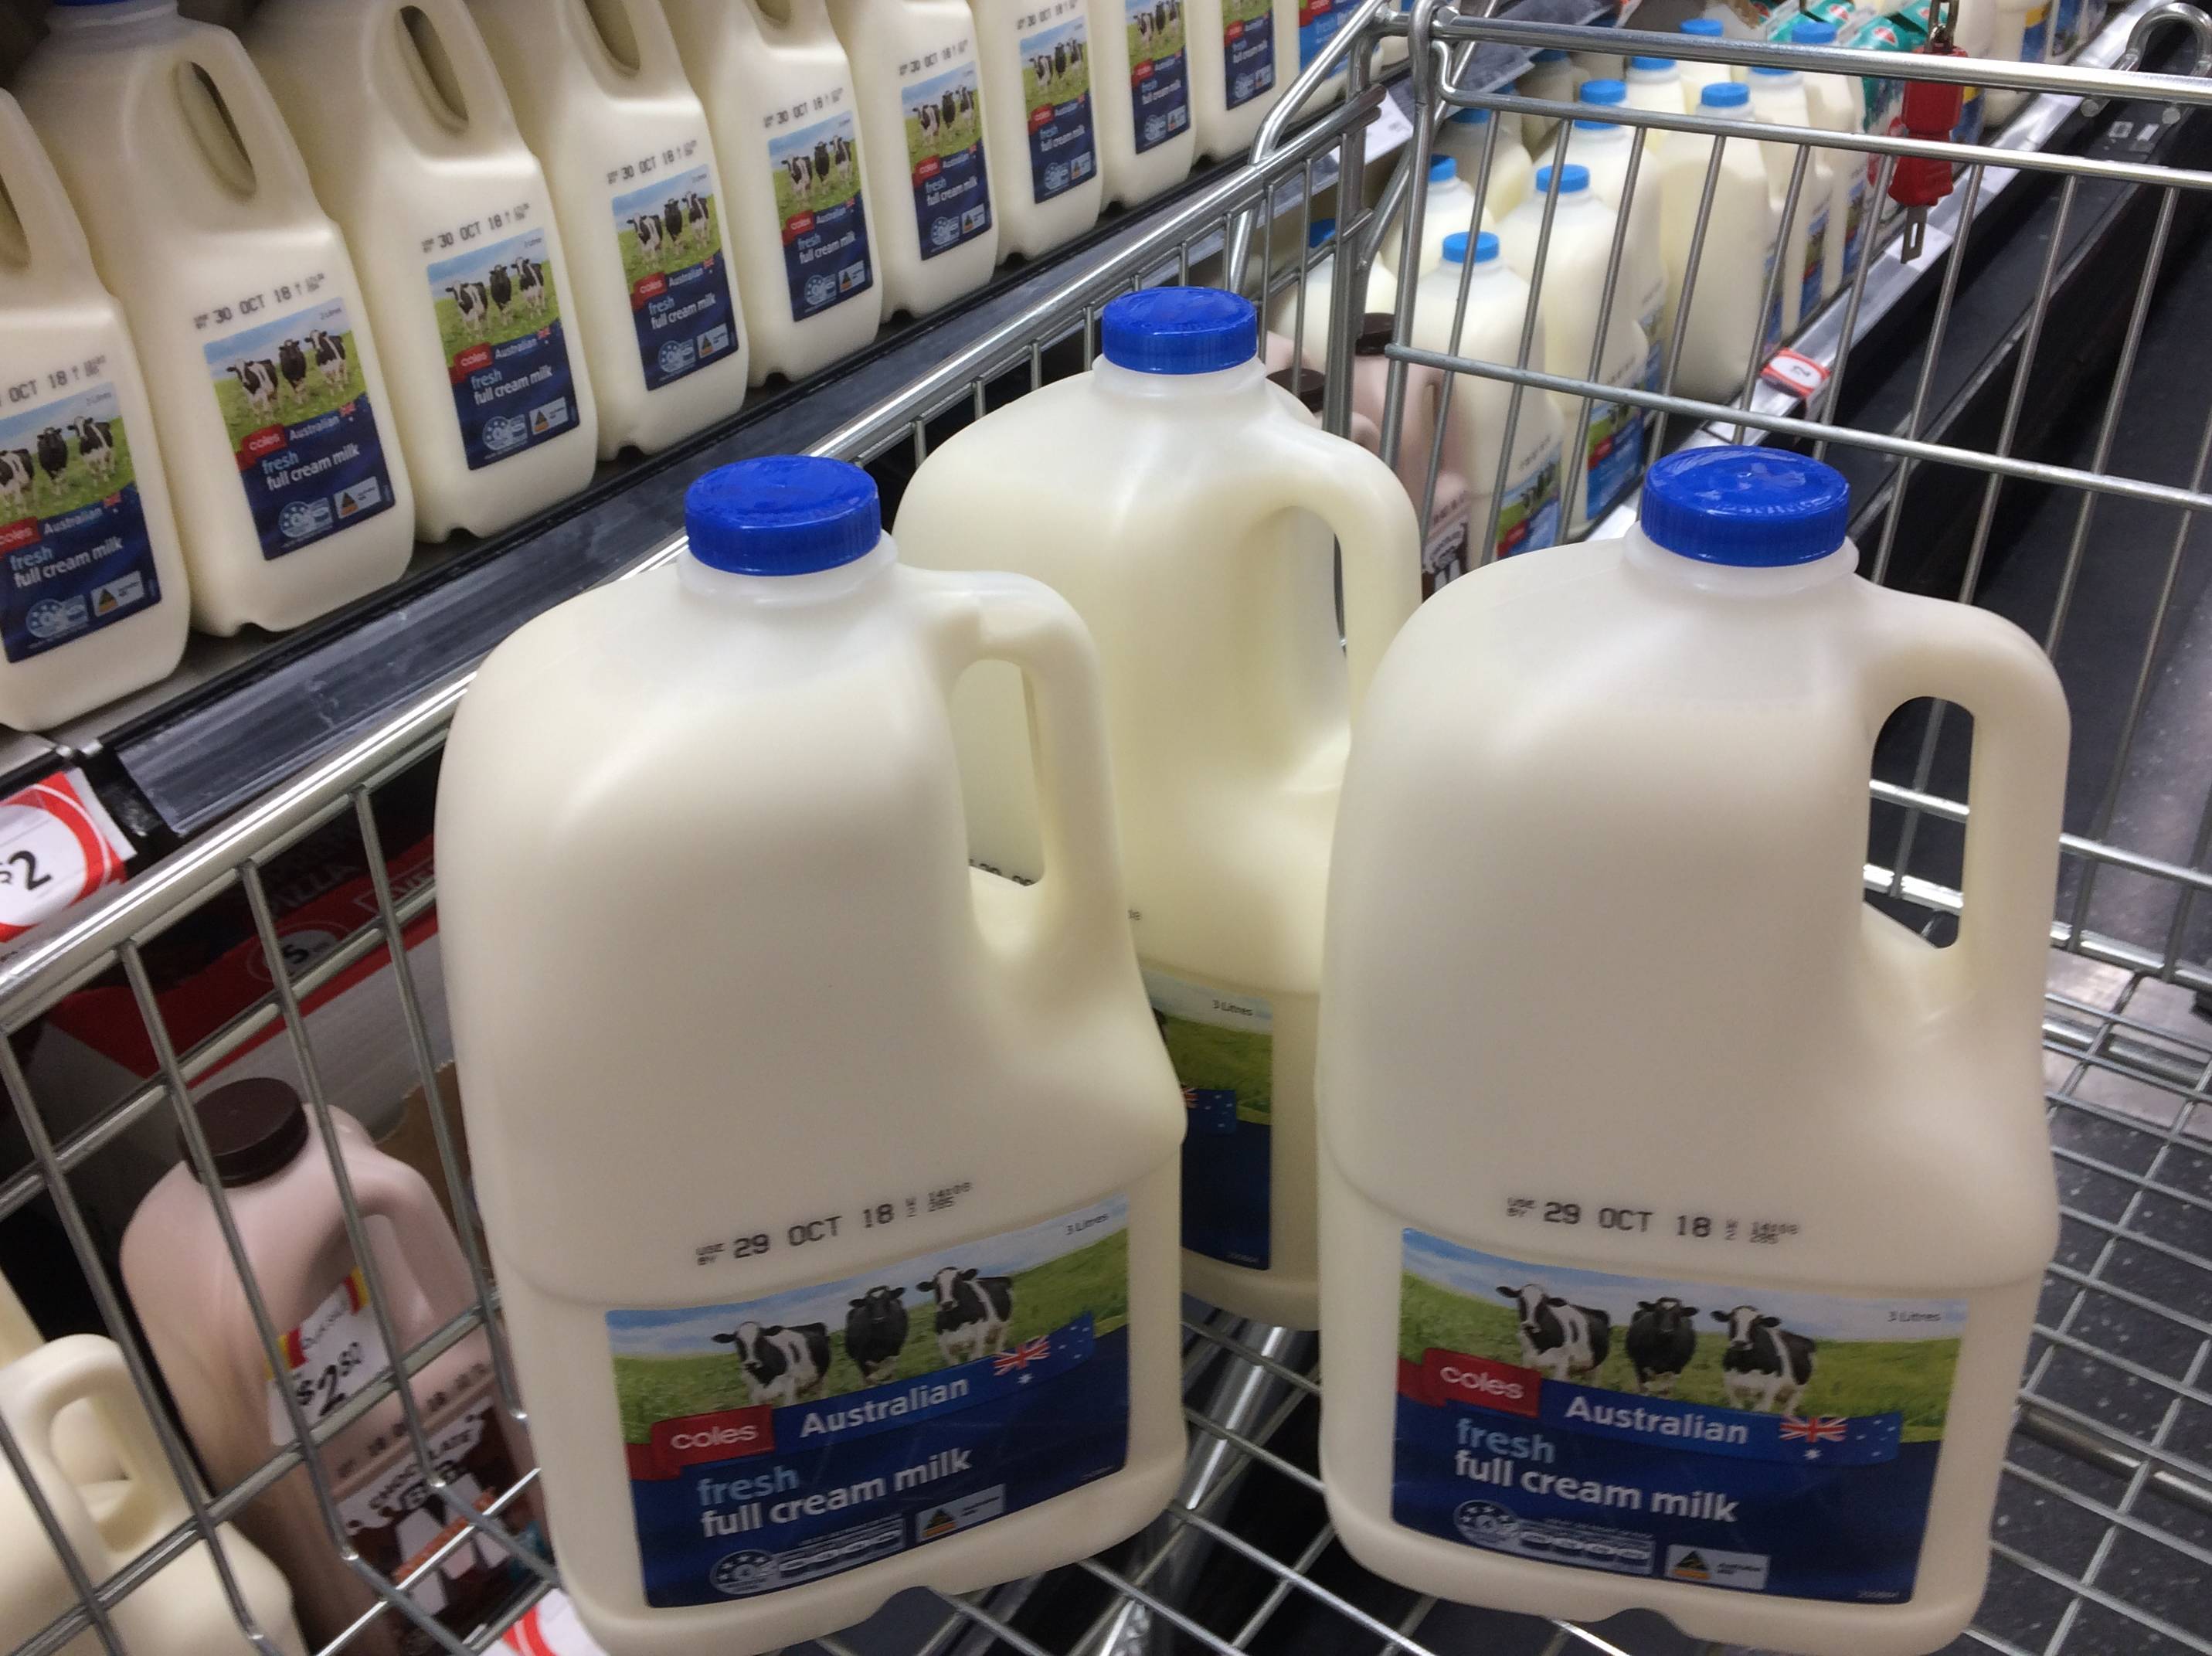 Floods, pandemics, wars and market forces: What's driving up the price of milk?2